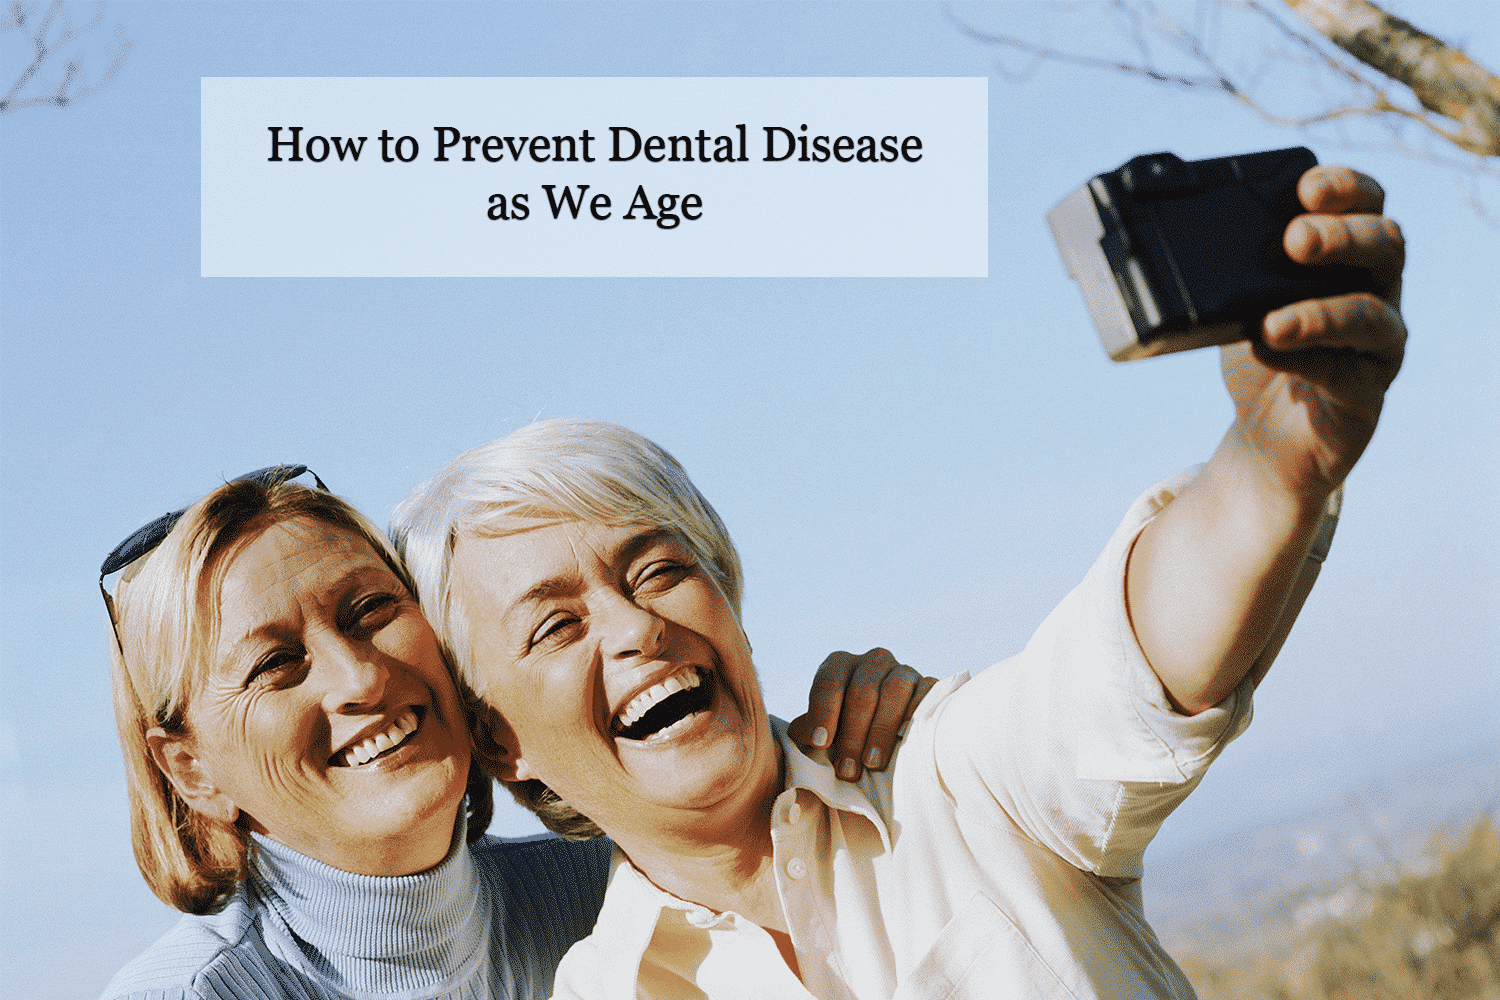 How to Prevent Dental Disease as We Age